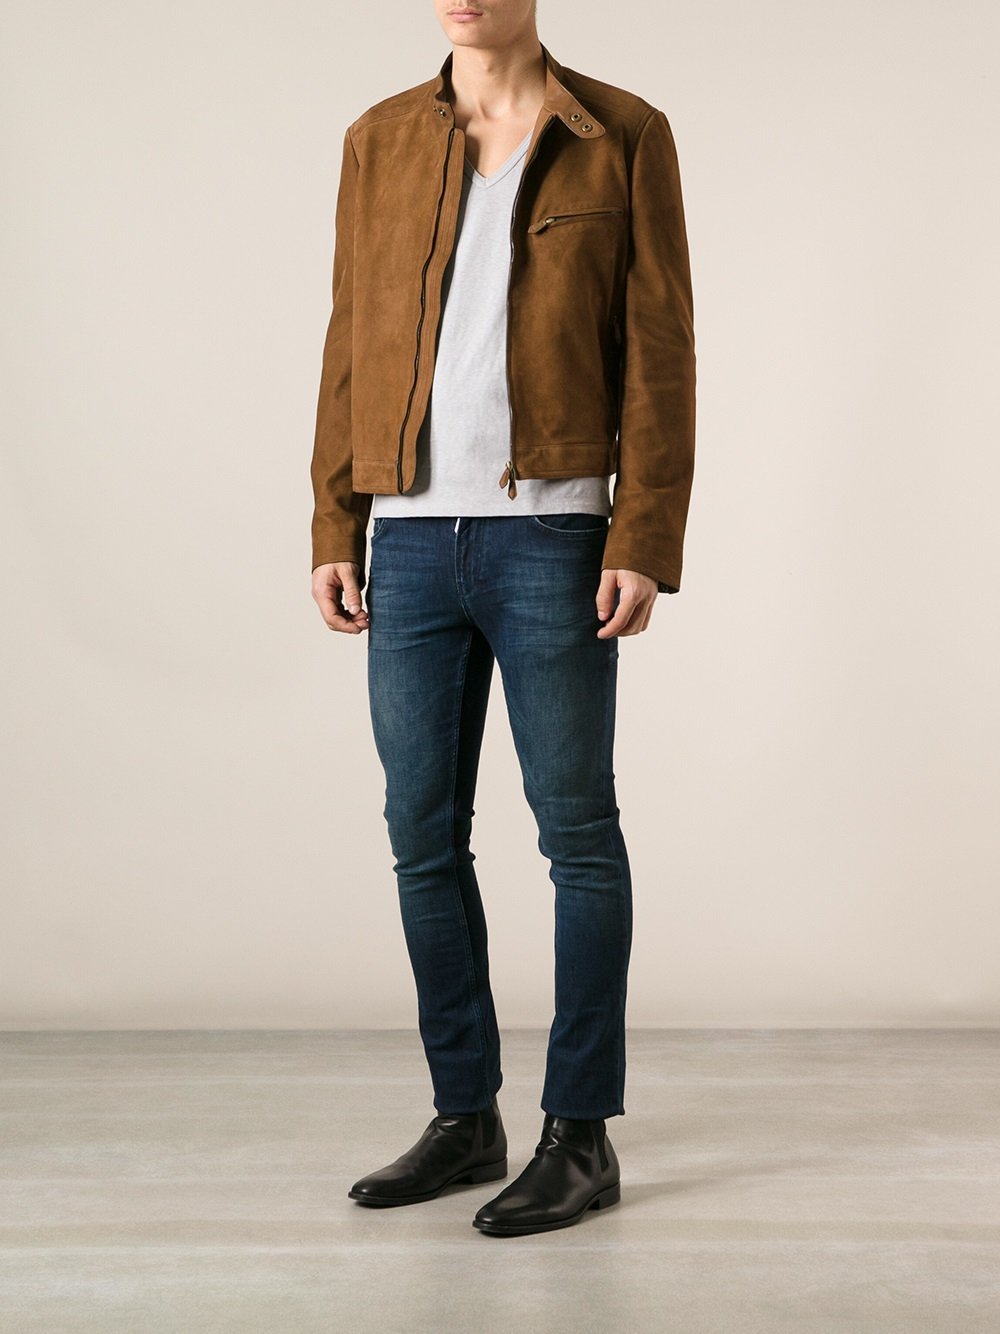 Lyst - Tom Ford Leather Jacket in Brown for Men